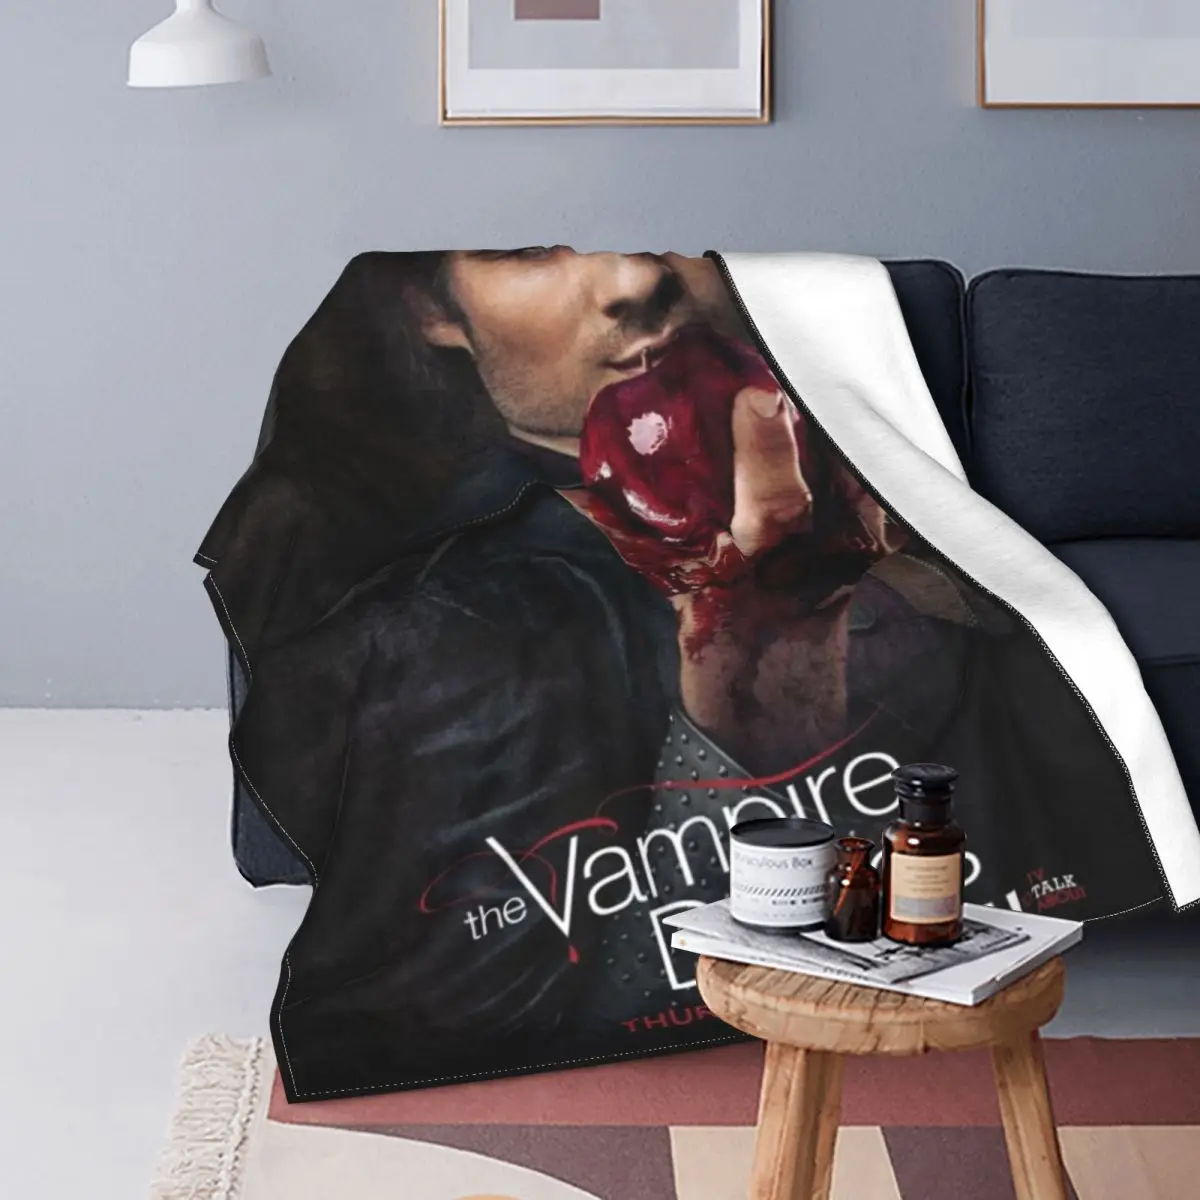 

Damon Salvatore The Vampire Diaries Blankets Fleece Horror Multi-function Warm Throw Blankets for Bed Travel Bedding Throws